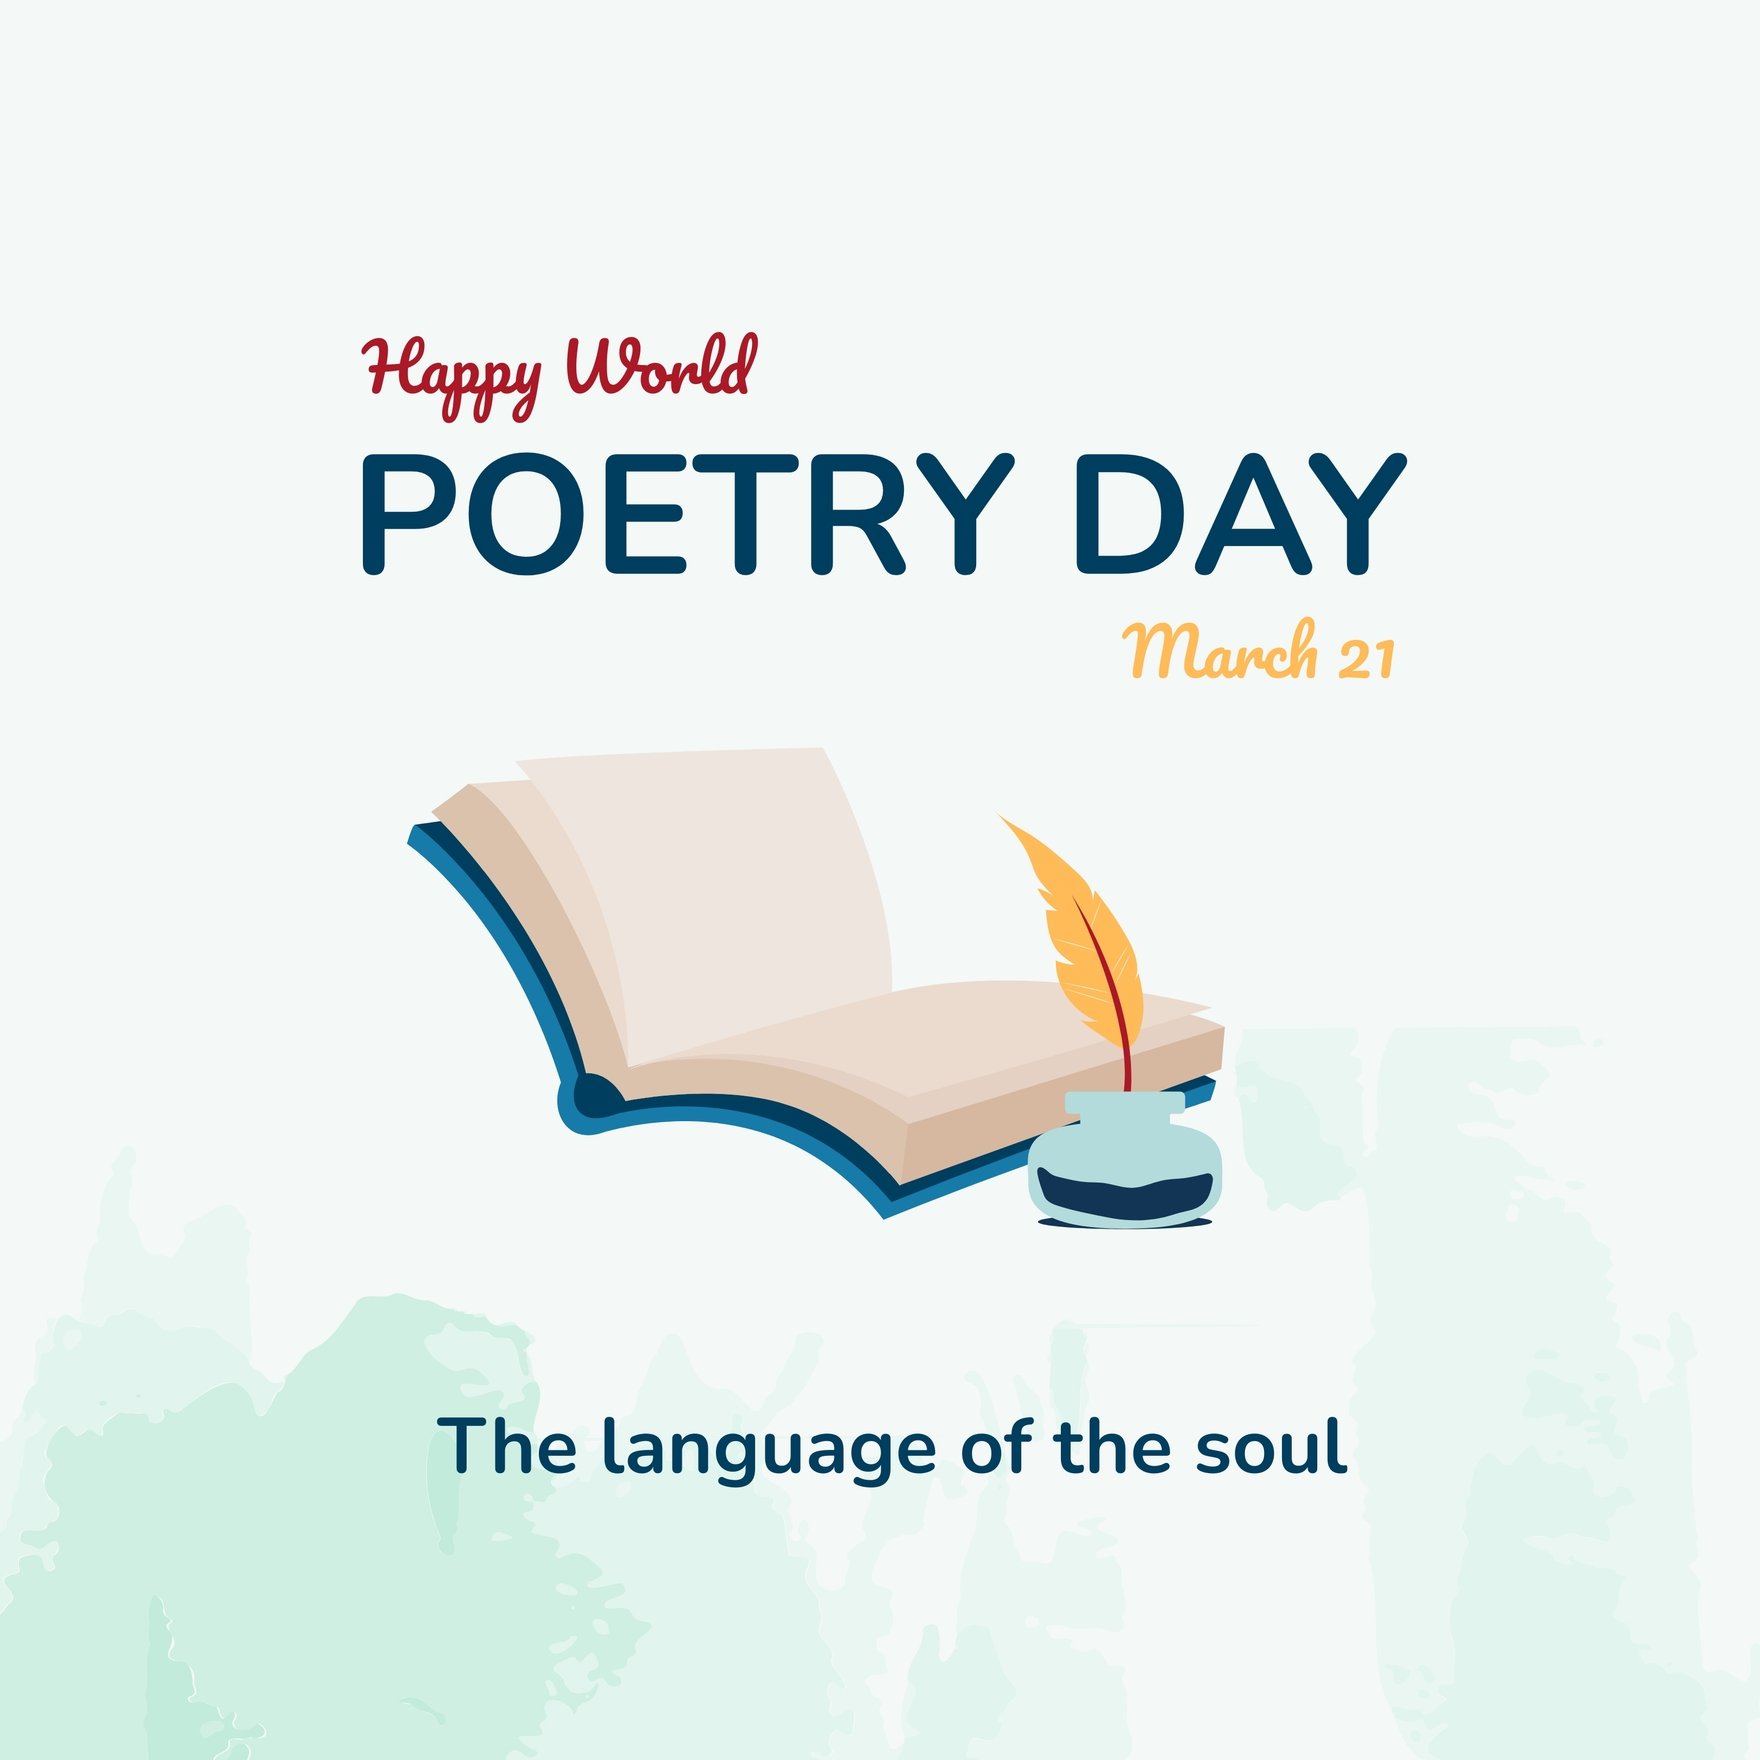 Free World Poetry Day FB Post in Illustrator, PSD, EPS, SVG, PNG, JPEG